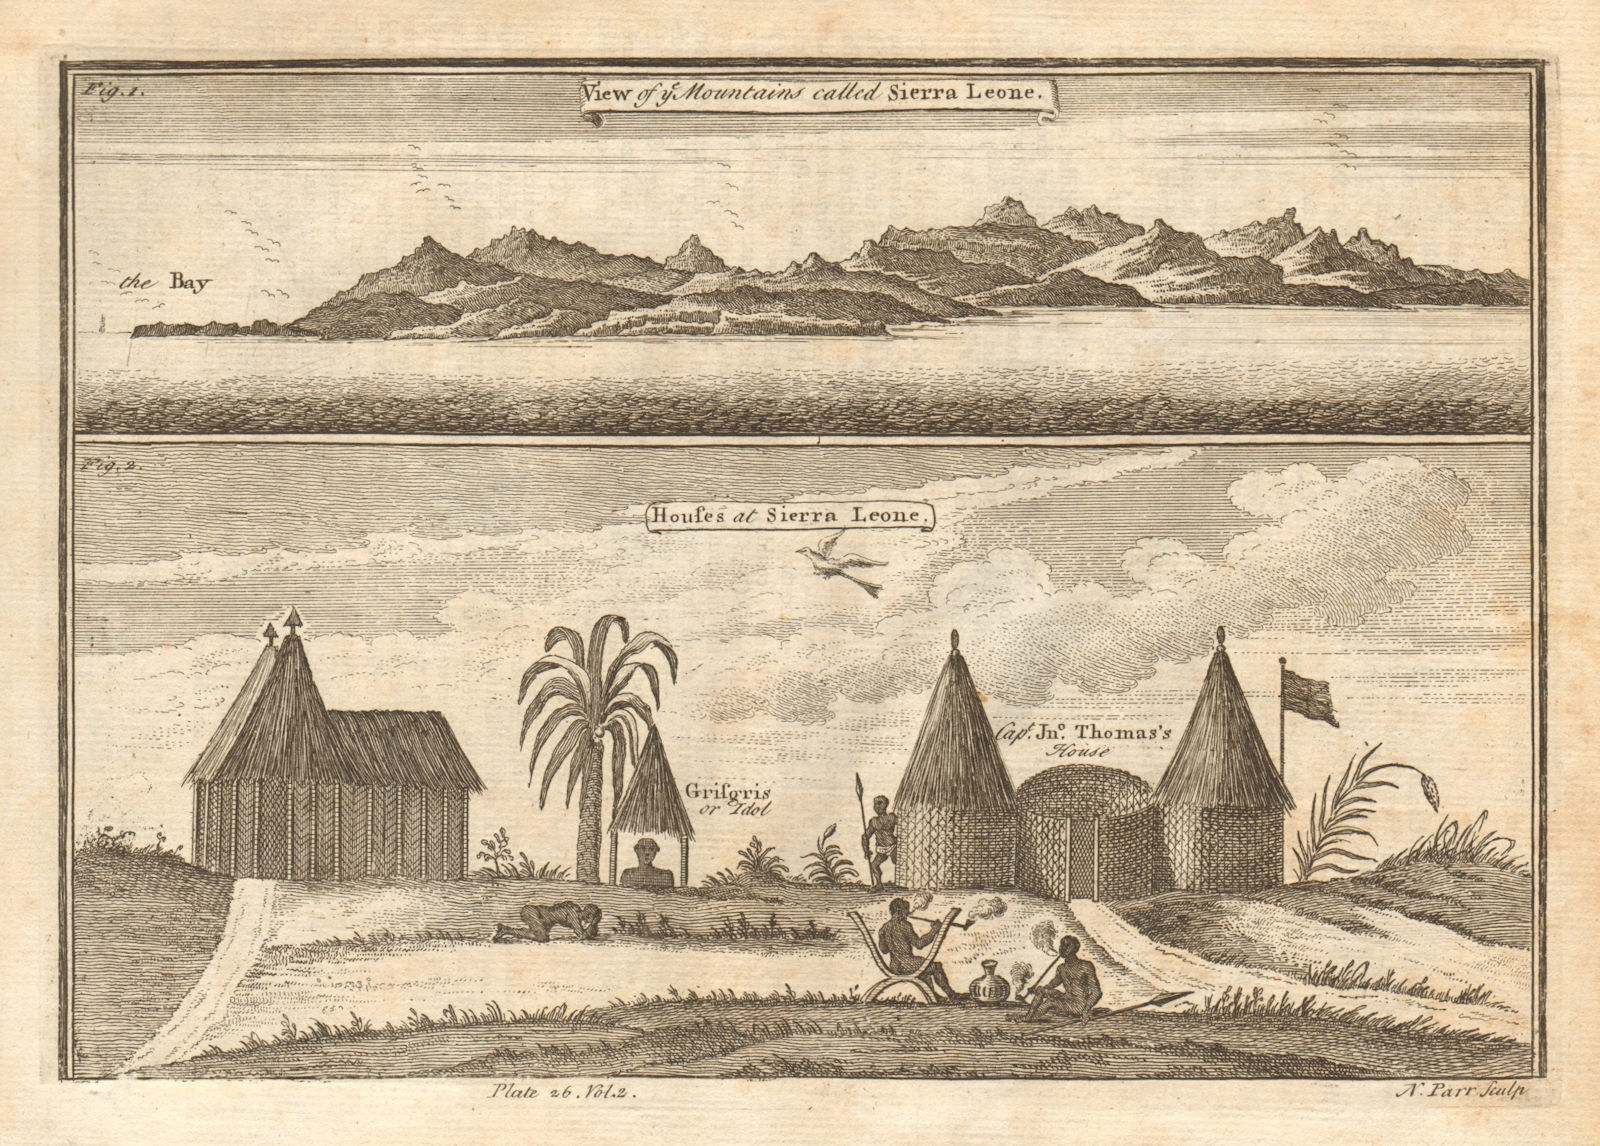 View of the mountains & coast of Sierra Leone. Houses. Grisgris idol. PARR 1745